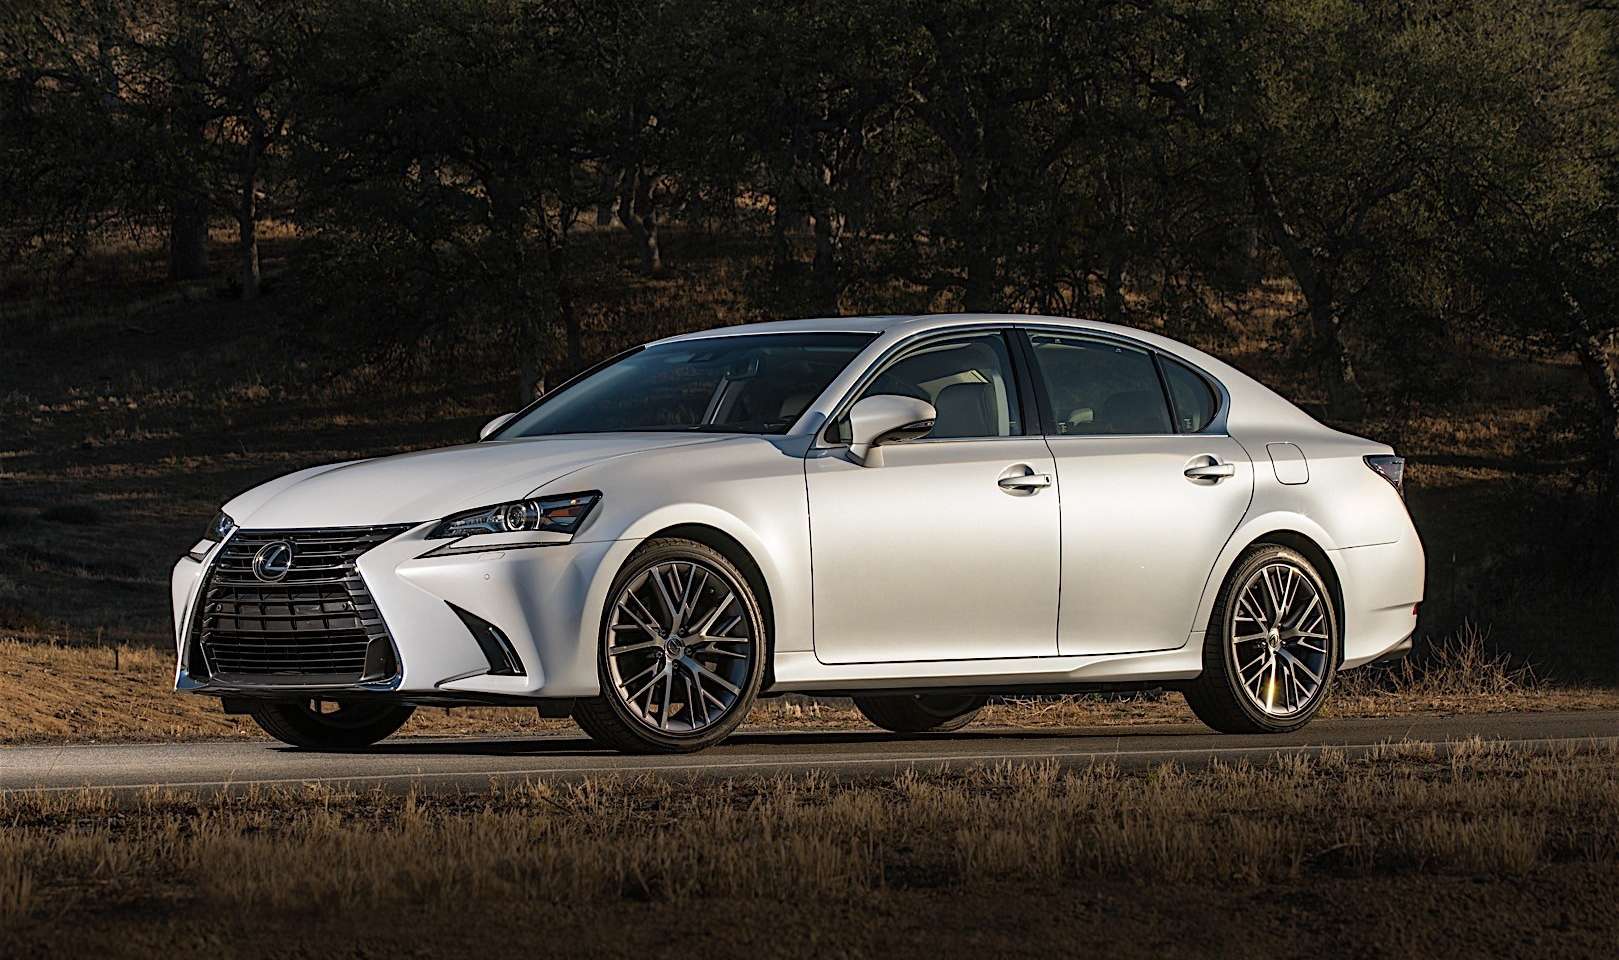 2017 Lexus GS 450h 0-60 Times, Top Speed, Specs, Quarter Mile, and 